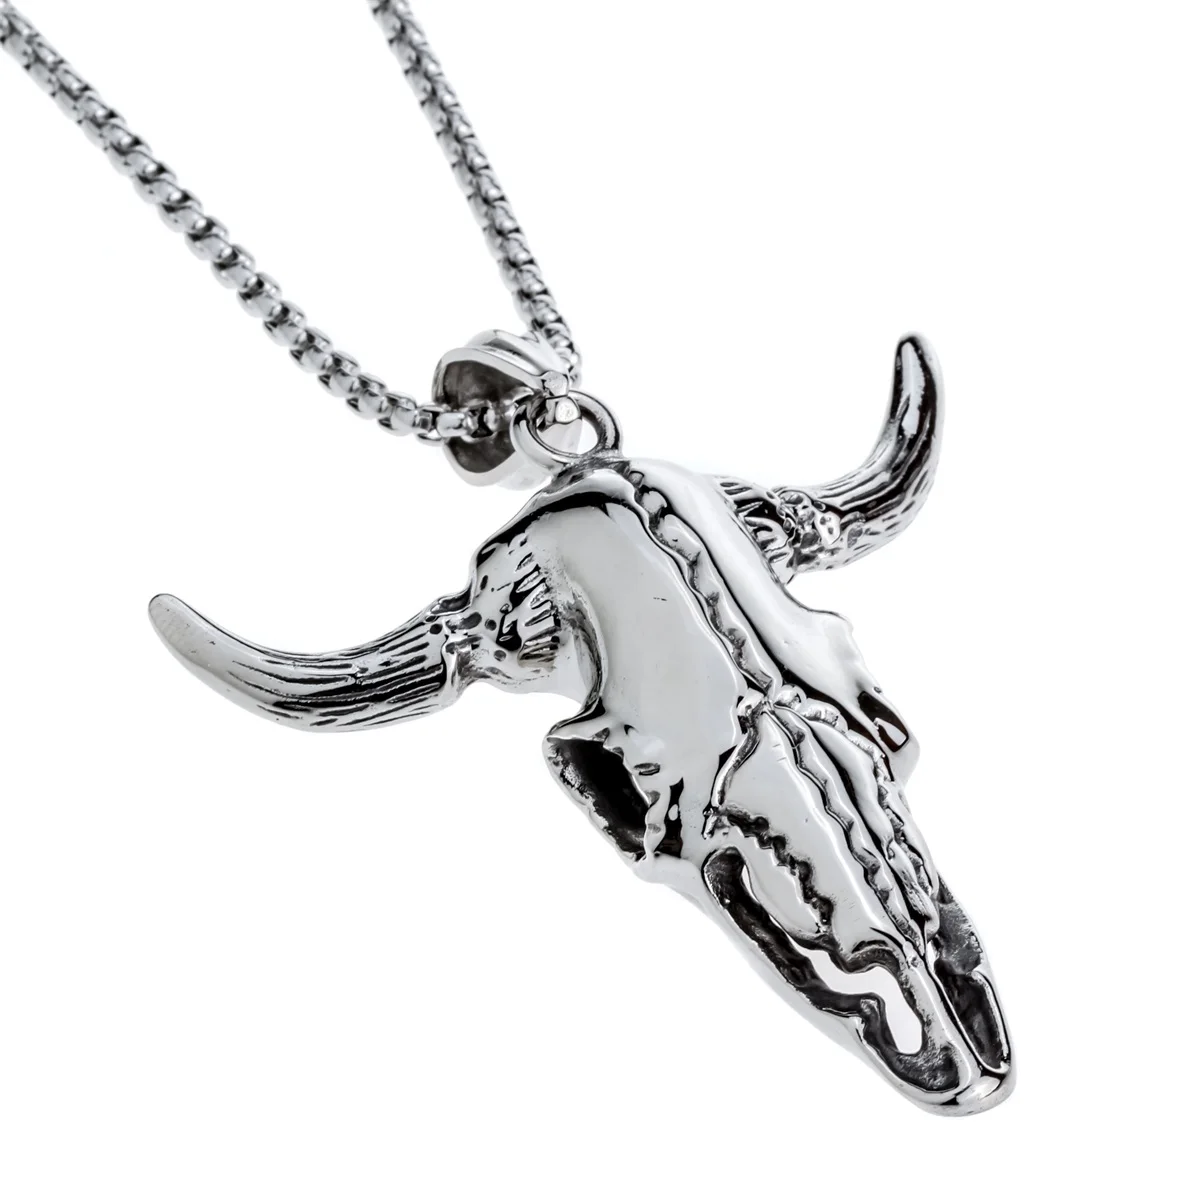 Yacq skeleton necklace pendant W chain stainless steel 316L charm jewelry gifts for men dad boyfriend him kids dropship E006 | Украшения и